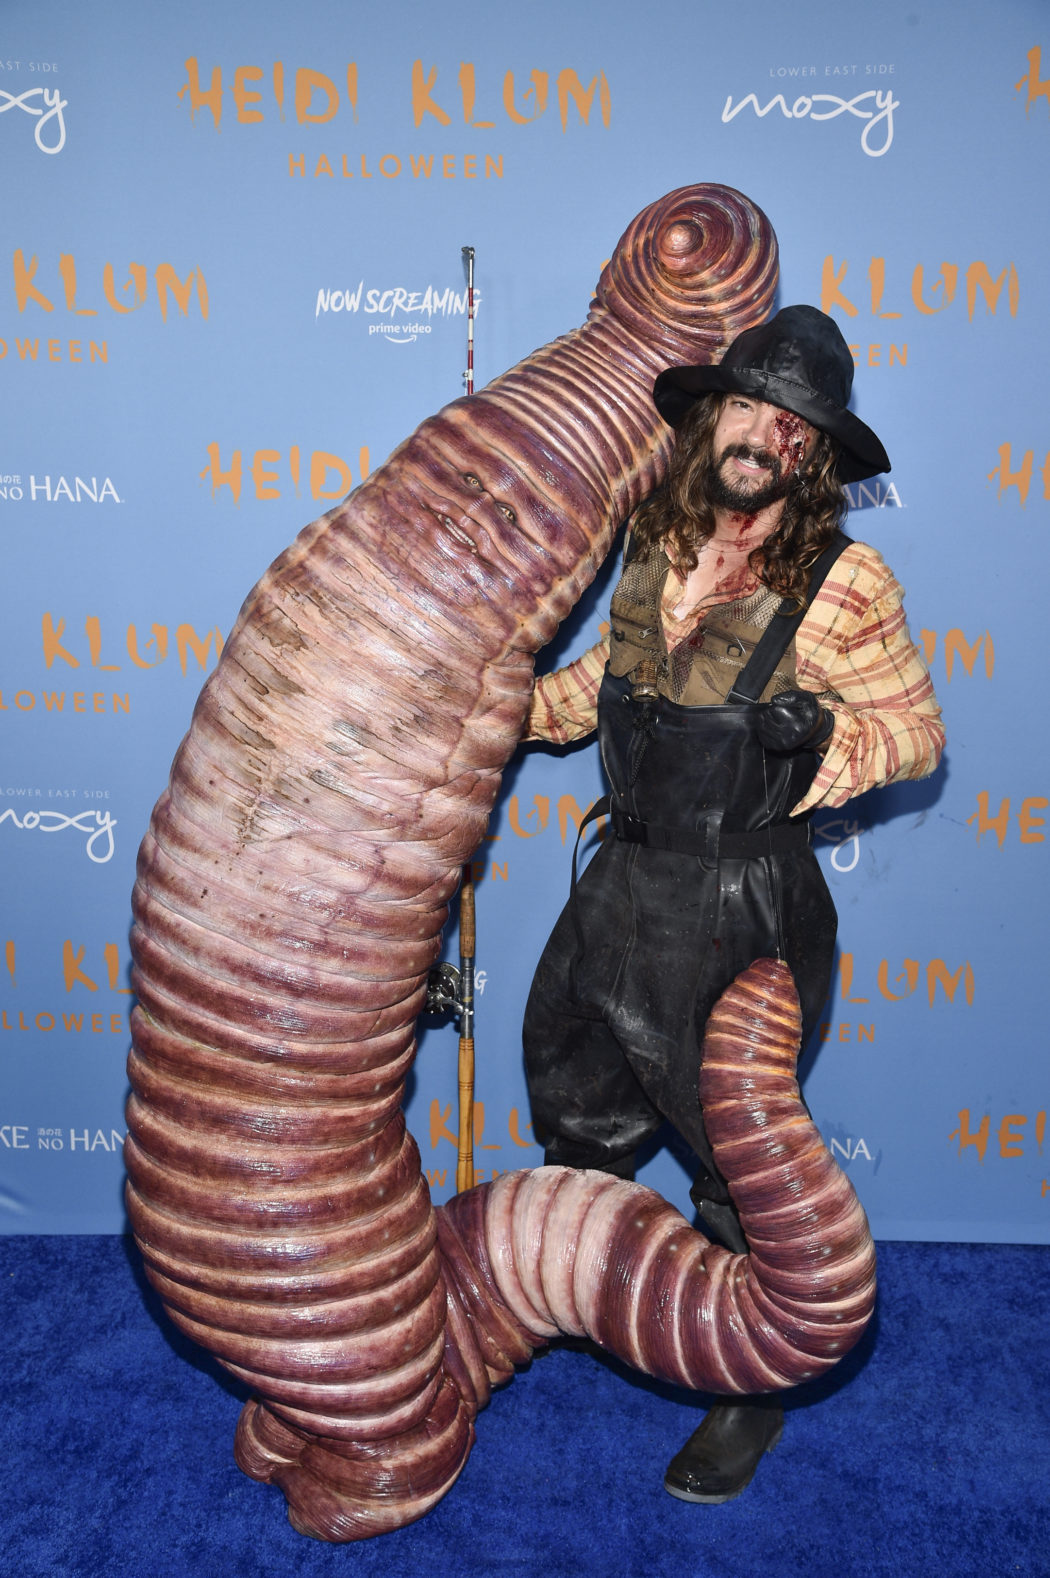 Heidi Klum, left, and husband Tom Kaulitz attend Klum’s 21st annual Halloween party at Sake No Hana at Moxy Lower East Side on Monday, Oct. 31, 2022, in New York. (Photo by Evan Agostini/Invision/AP)